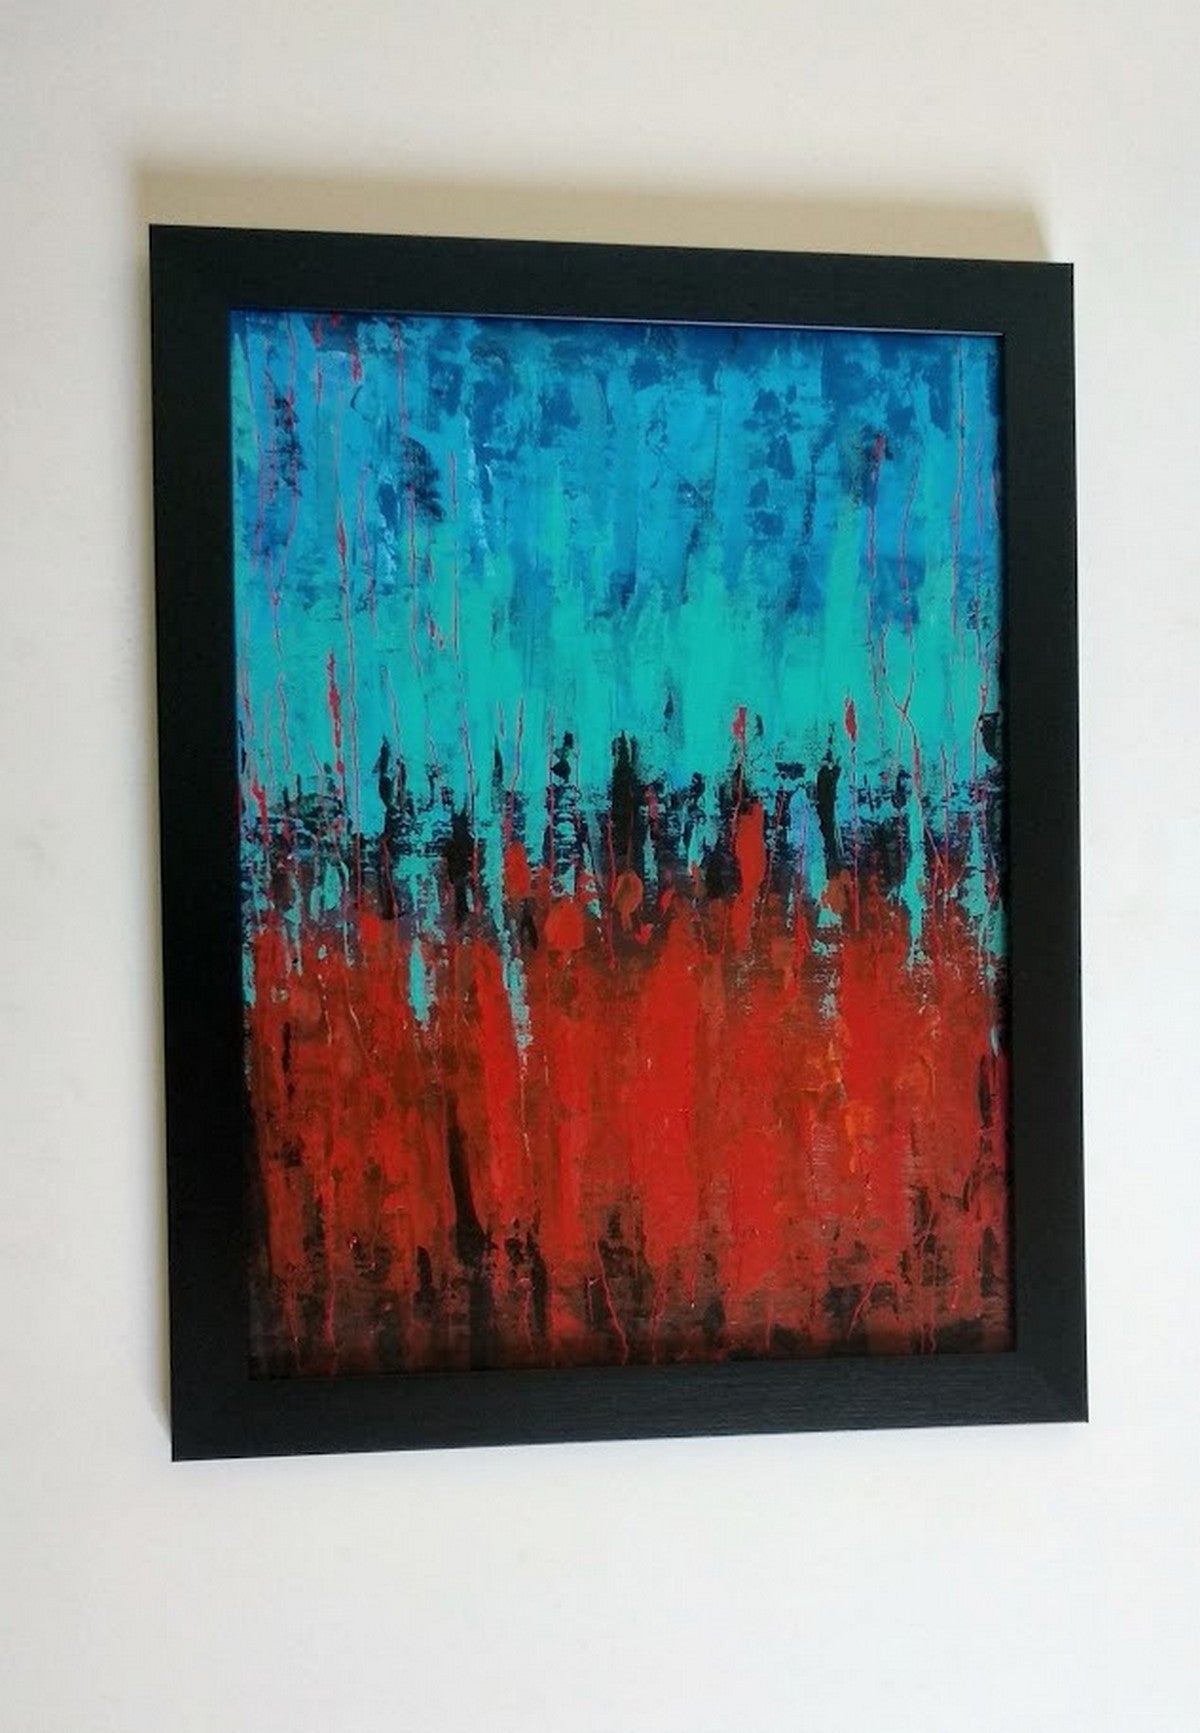 Abstract Painting Red &Turquoise in the frame